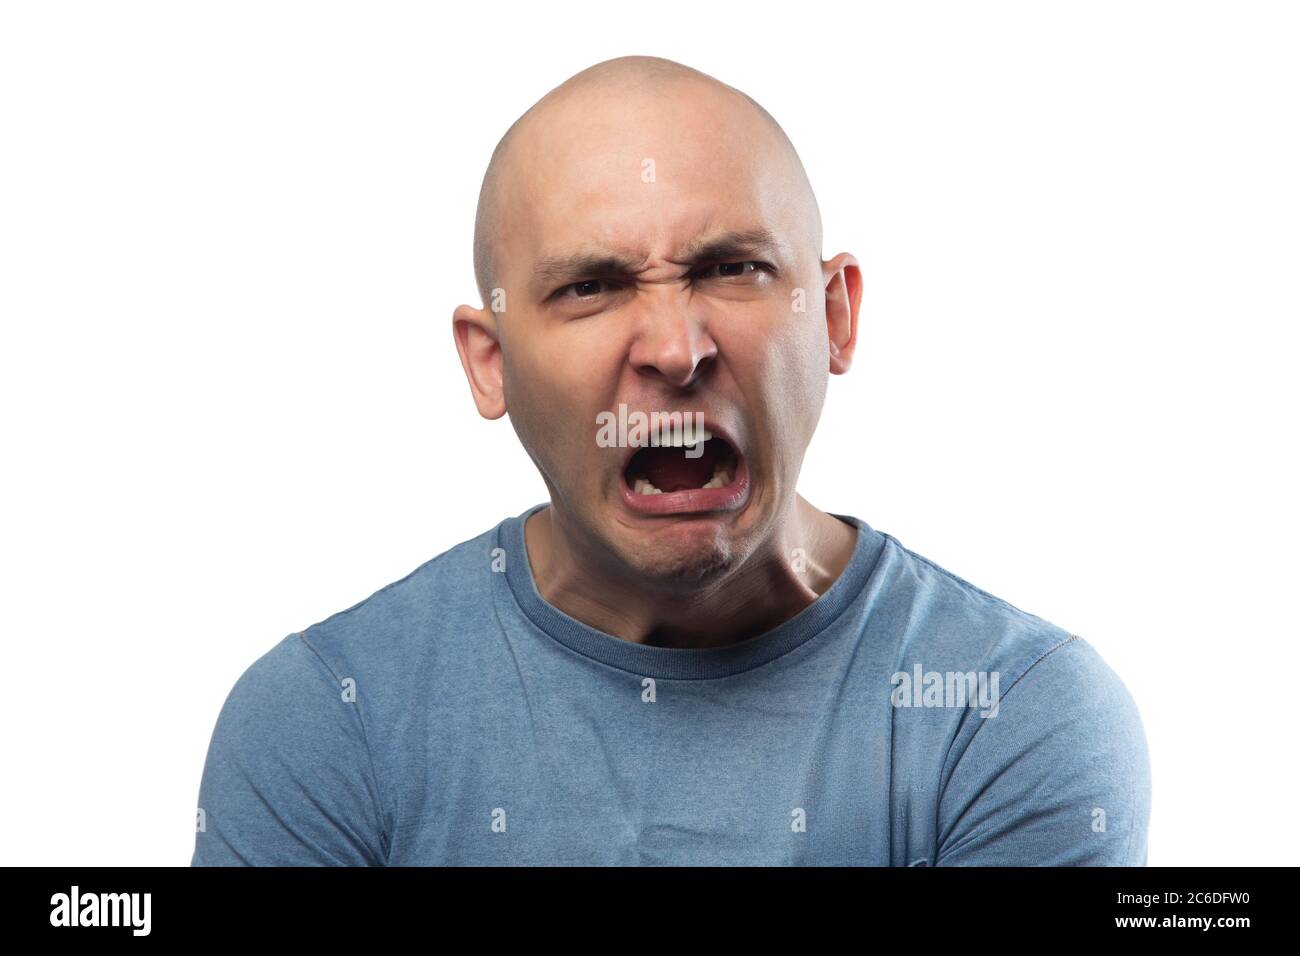 Photo of young bald angry screaming man in blue tee shirt Stock Photo